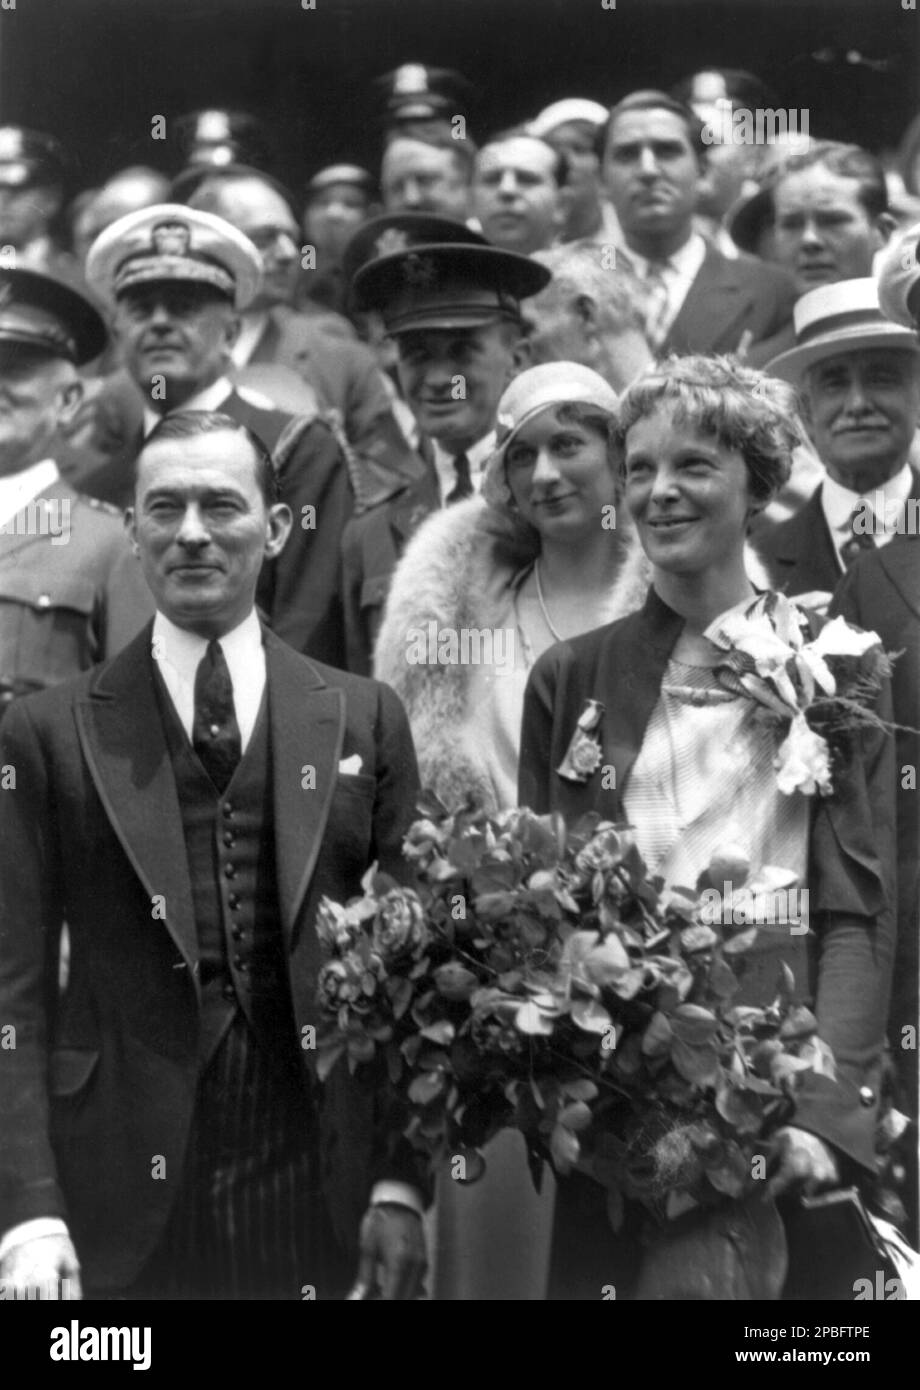 1932 , New York , USA  :  The  most celebrated woman aviator AMELIA EARHART ( 1897 - 1937 ) with Mayor JAMES WALKER of New York. Photo by by Samuel O. Bancroft  . Earhart was the first woman to receive the Distinguished Flying Cross which she was awarded as the first aviatrix to fly solo across the Atlantic Ocean.  She set many other records, wrote best-selling books about her flying experiences, and was instrumental in the formation of The Ninety-Nines, an organization for female pilots.  During an attempt to make a circumnavigational flight of the globe in 1937, Earhart disappeared over the Stock Photo